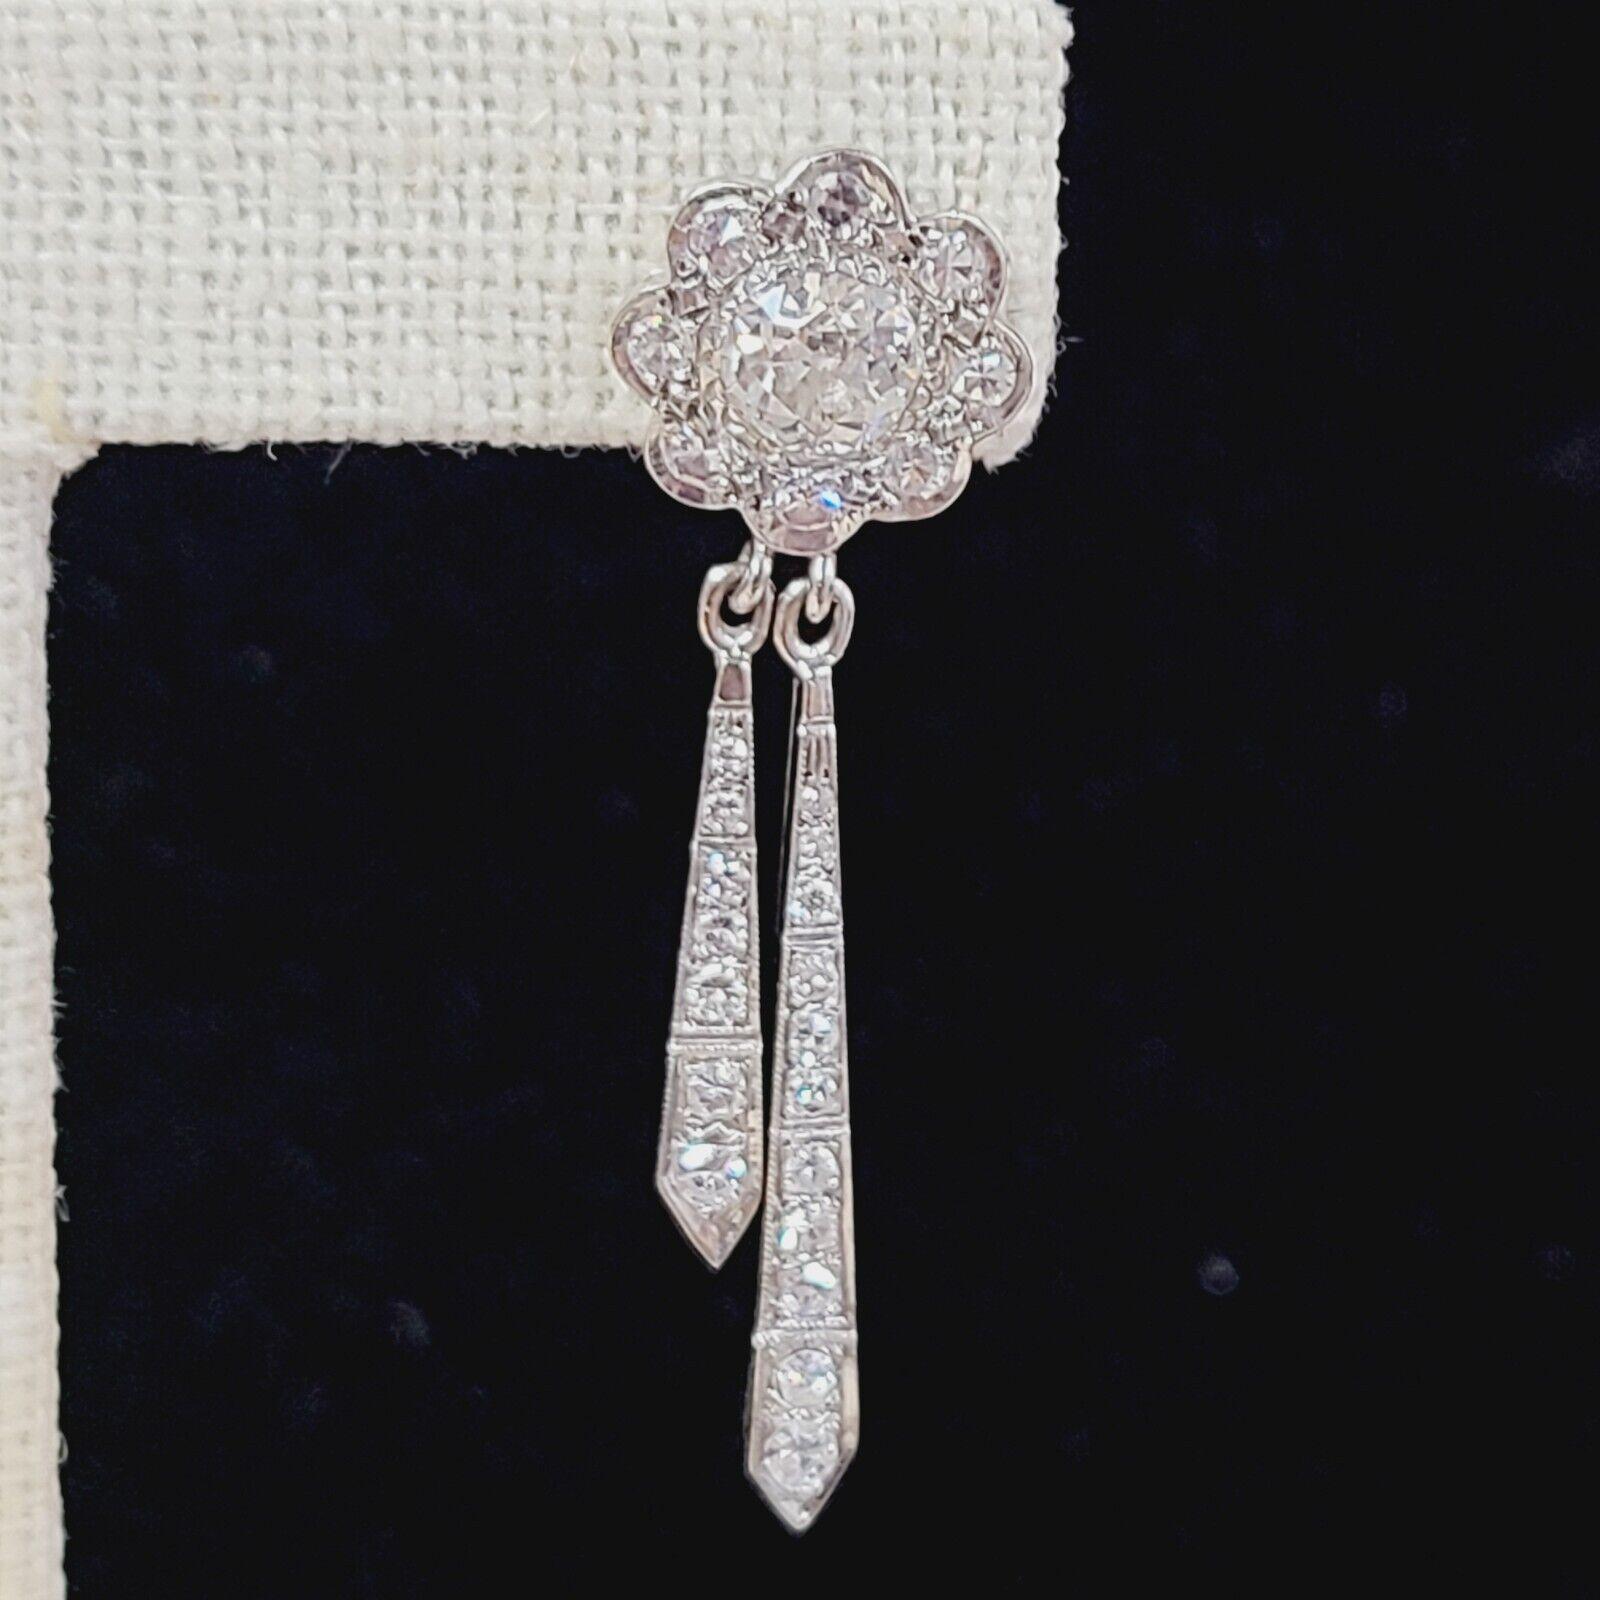 Stunning Art Deco 3.37CT Old Mine Cut Diamond Platinum Drop Earrings In Excellent Condition For Sale In Addison, TX